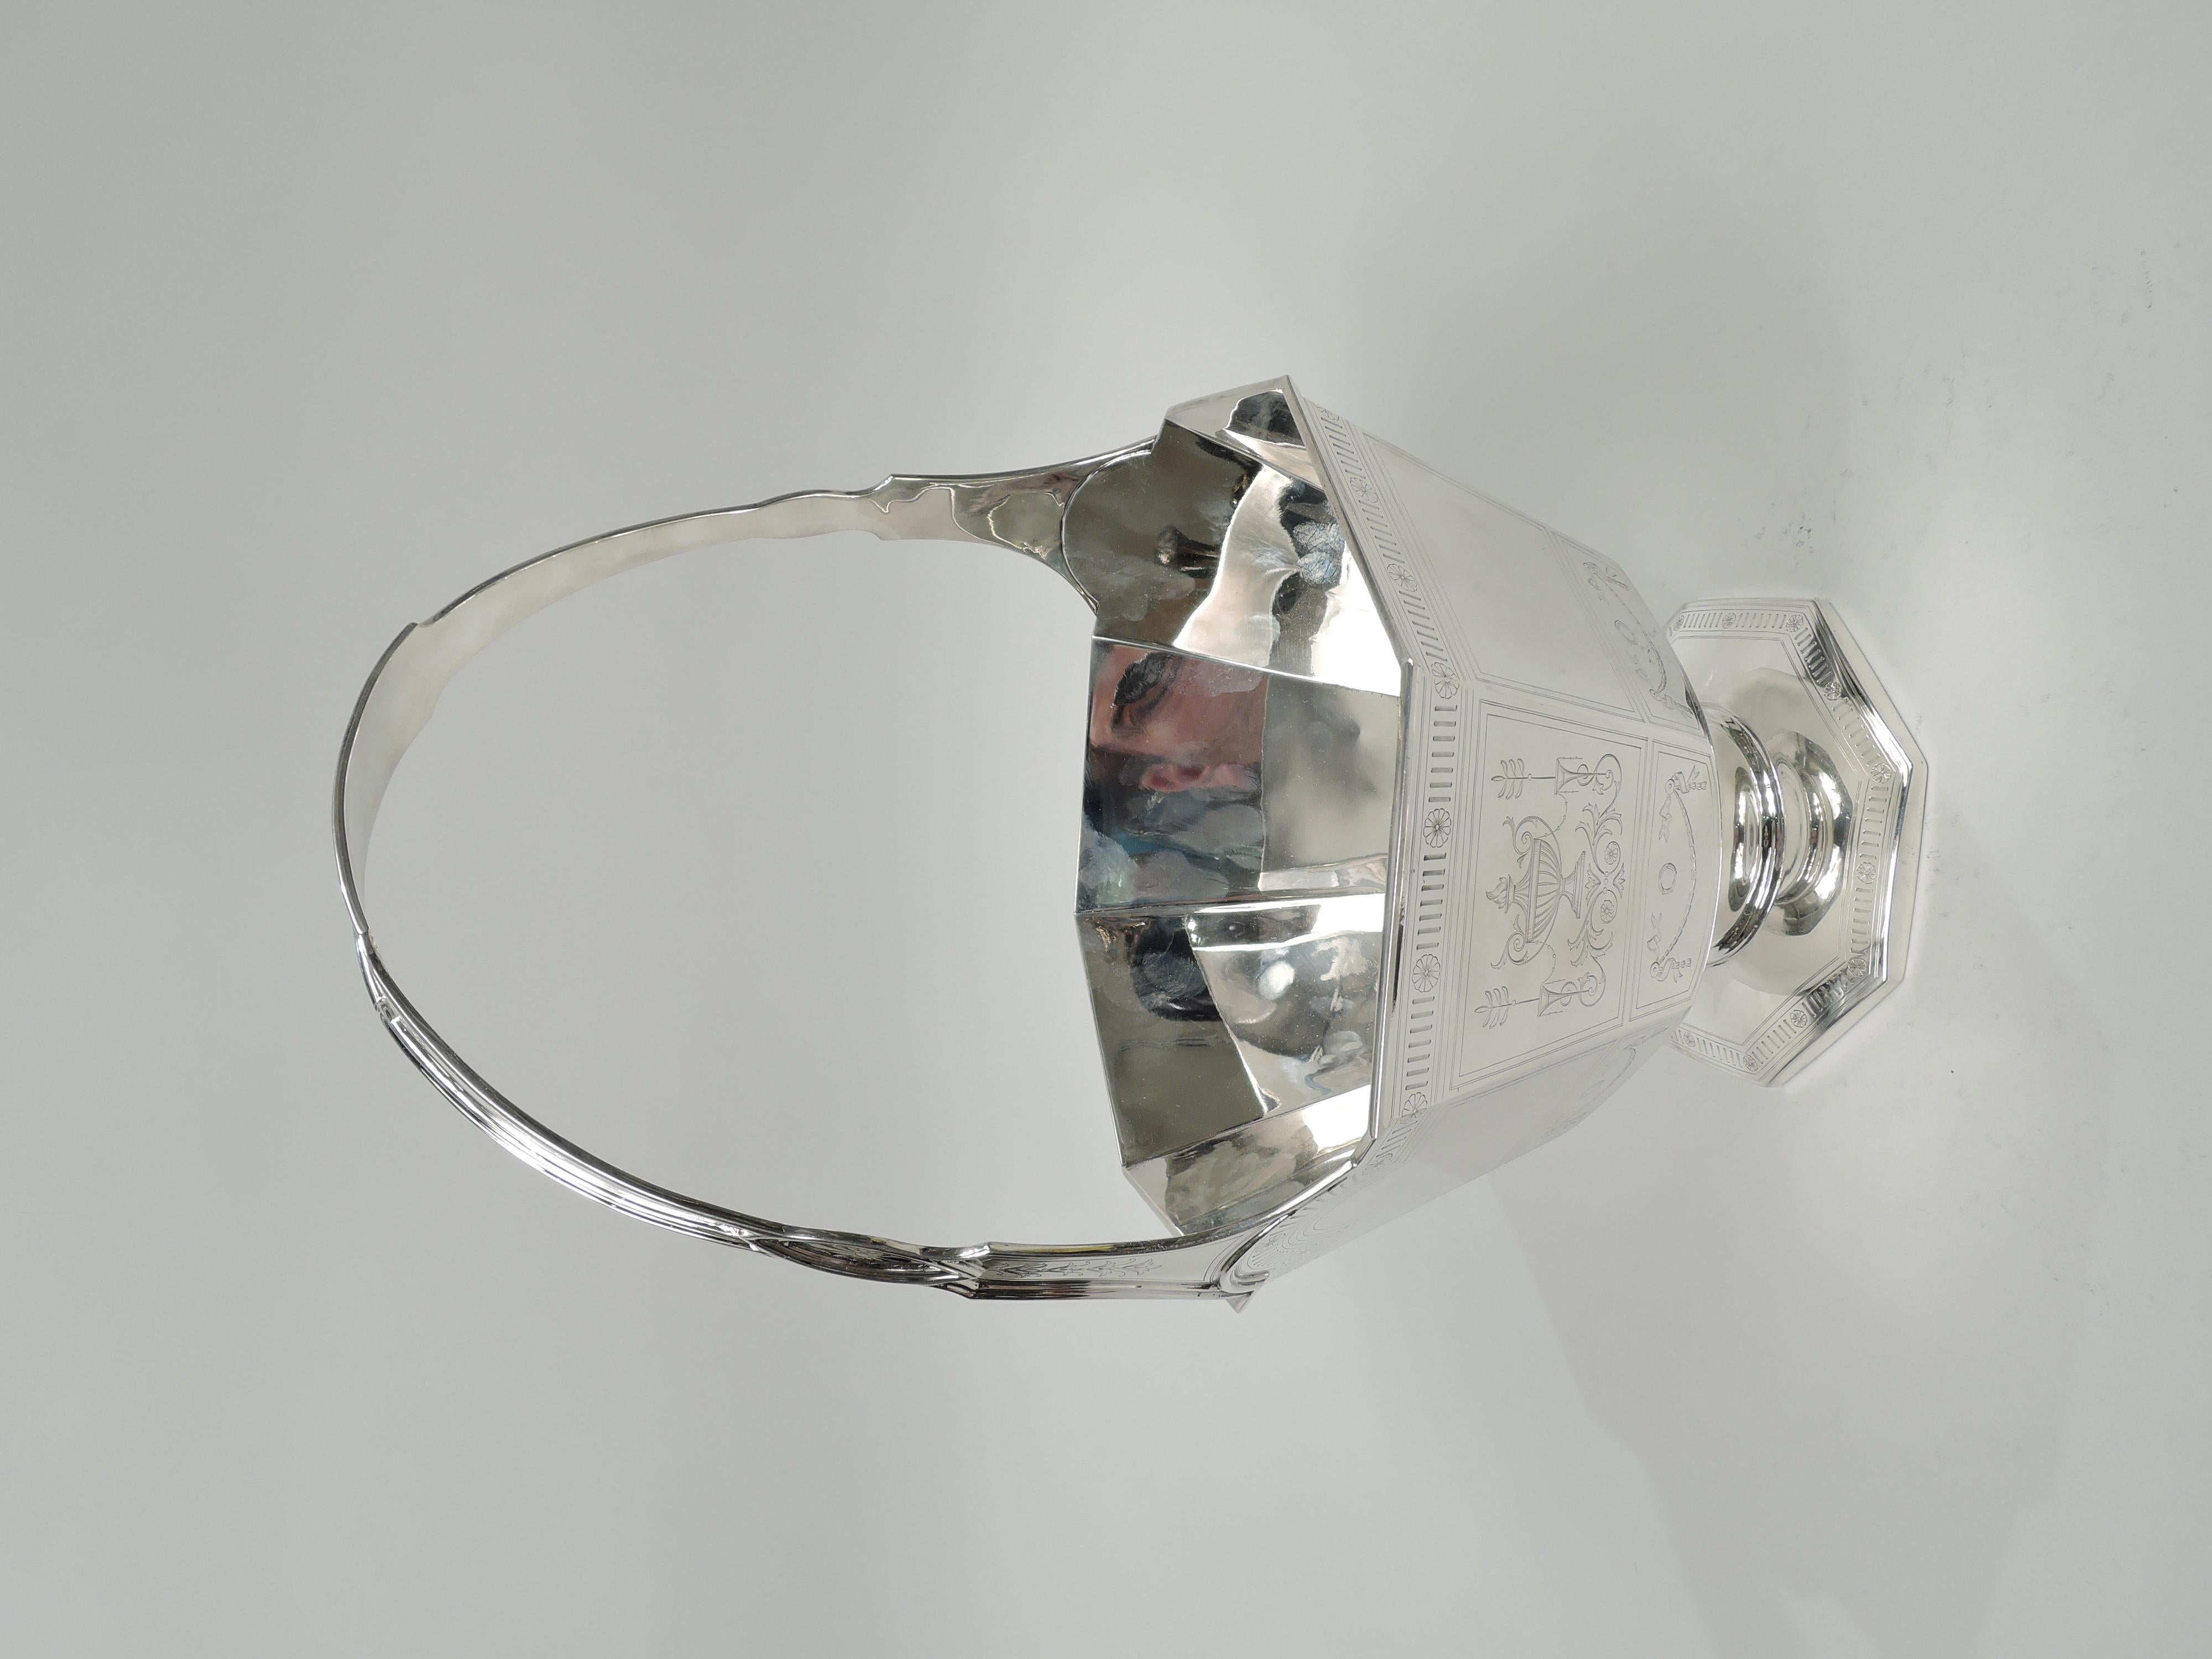 Edwardian Modern Regency sterling silver basket. Made by the Sweetser Co. in New York, ca 1910. Faceted octagonal bowl with straight and tapering sides on spool support mounted to raised and faceted octagonal foot; fixed curvilinear handle. Engraved